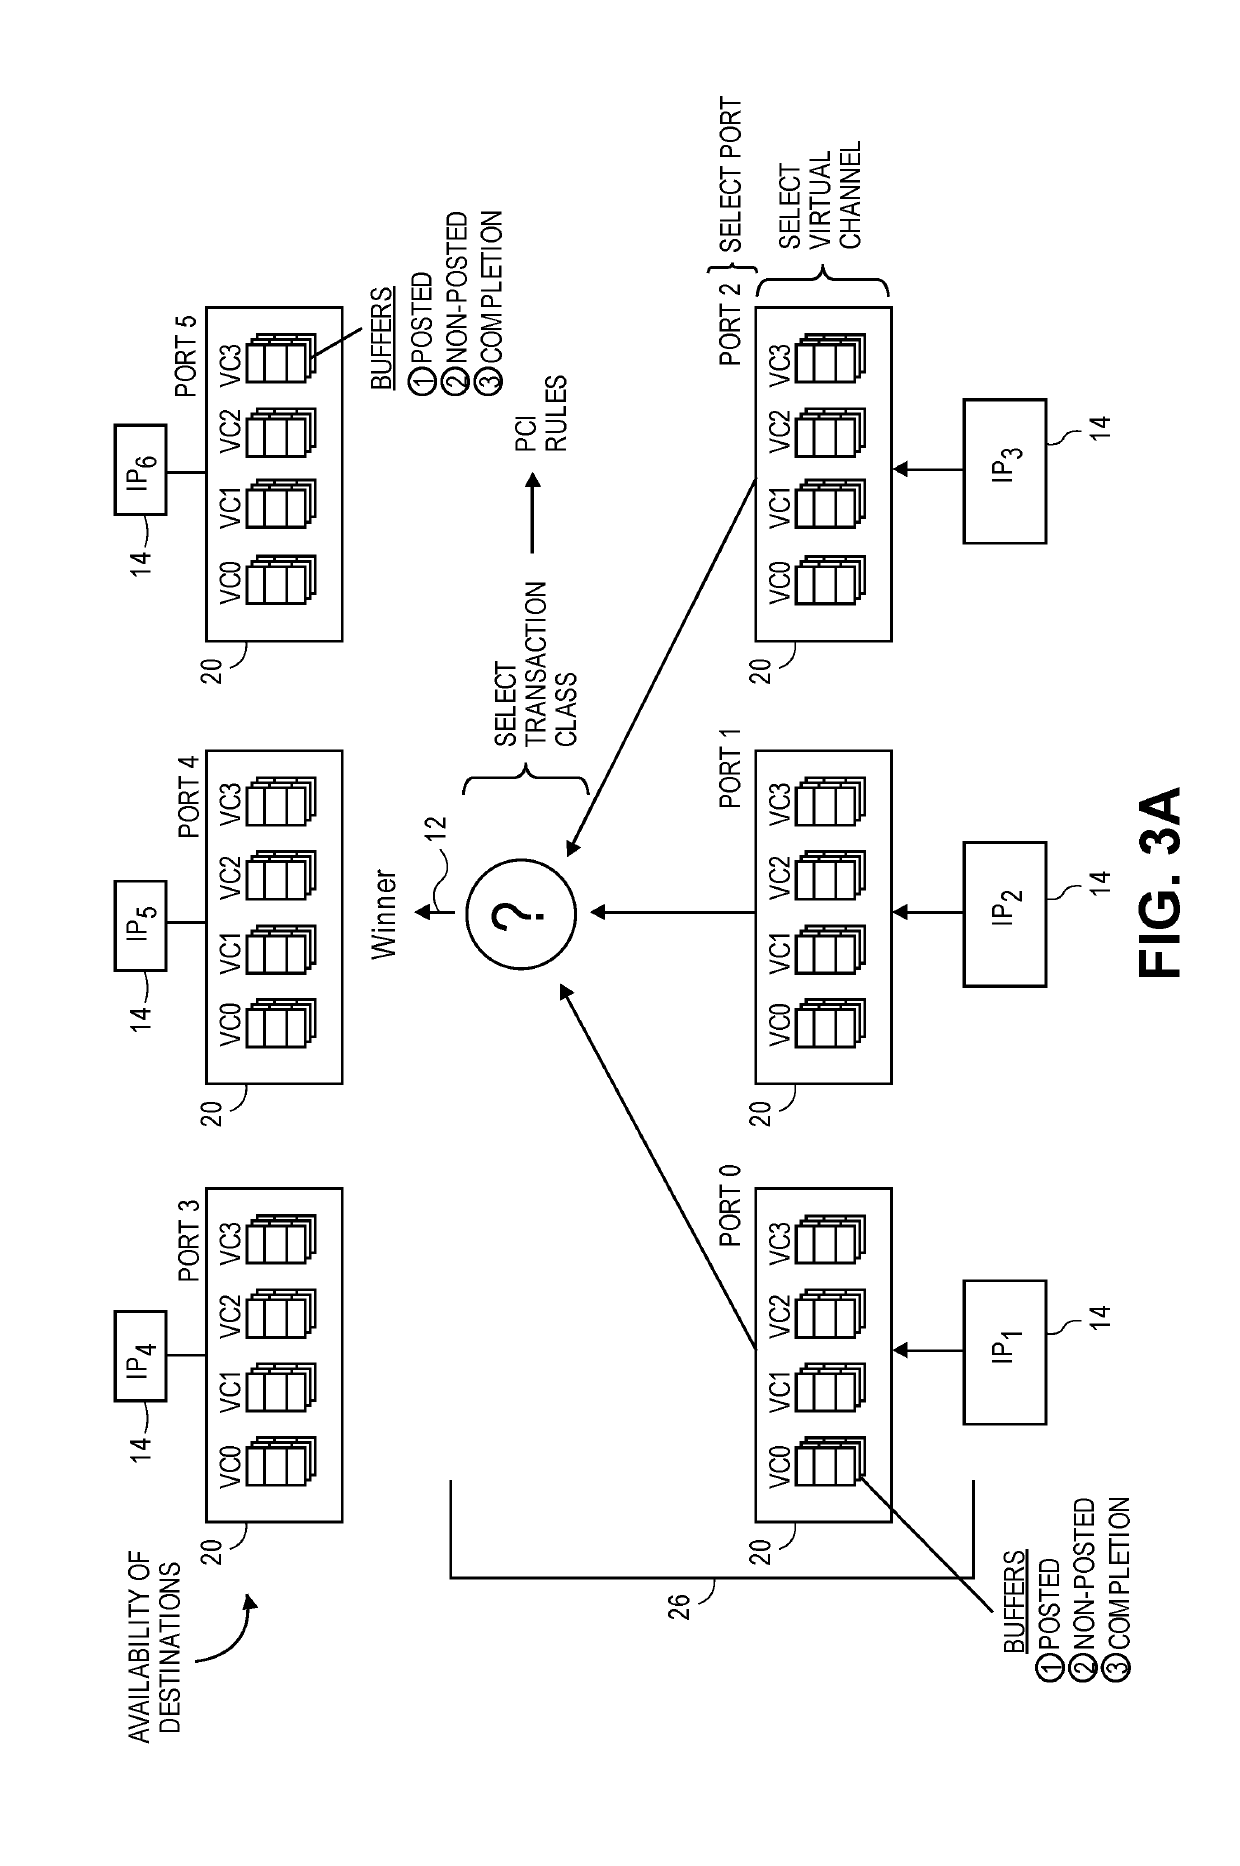 Protocol level control for system on a chip (SOC) agent reset and power management